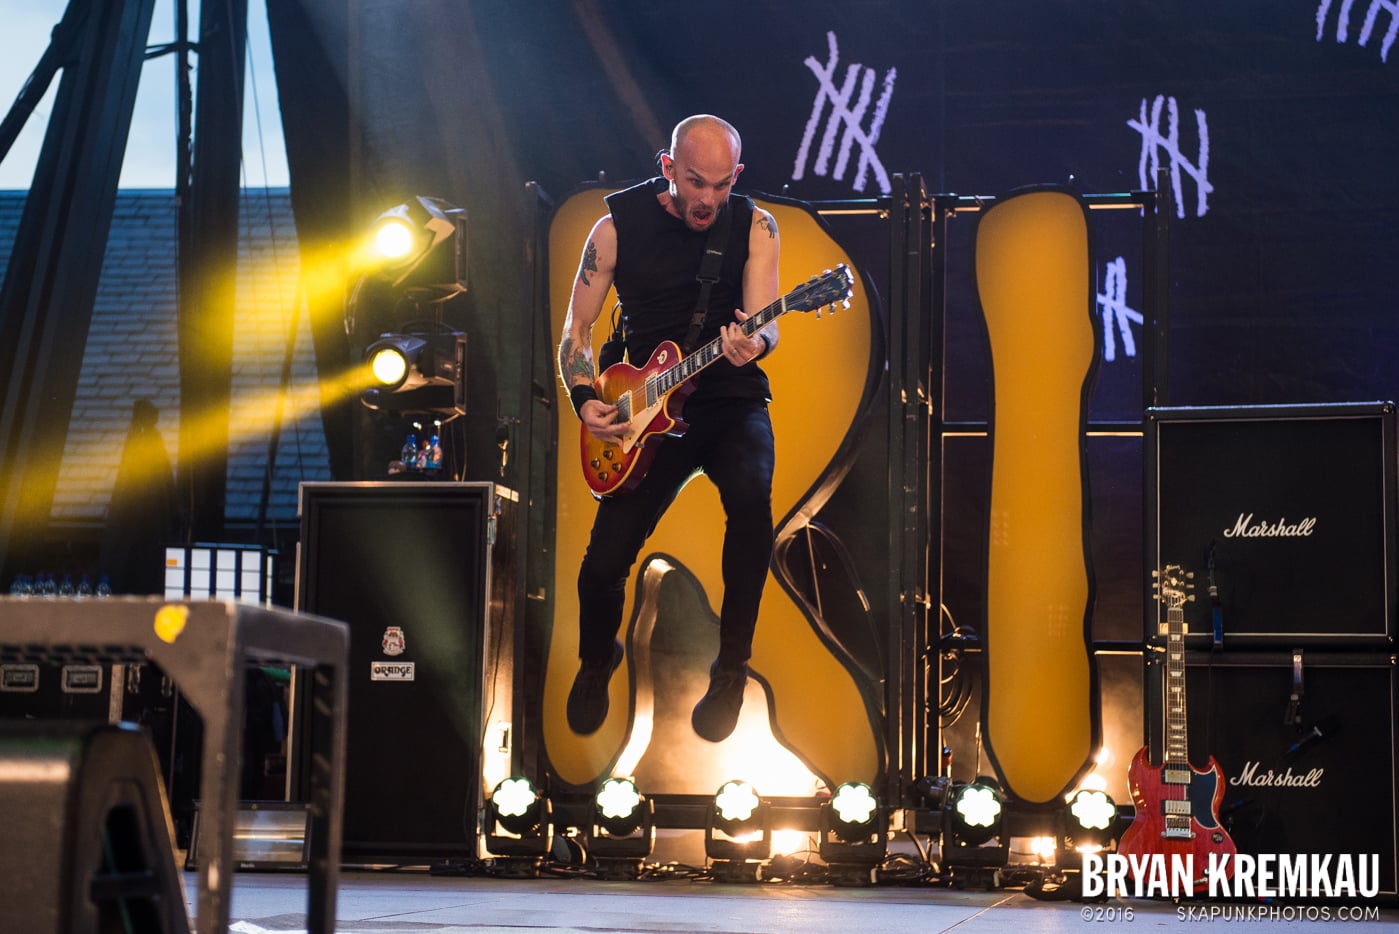 Rise Against @ Central Park SummerStage, NYC - 7.28.15 (54)